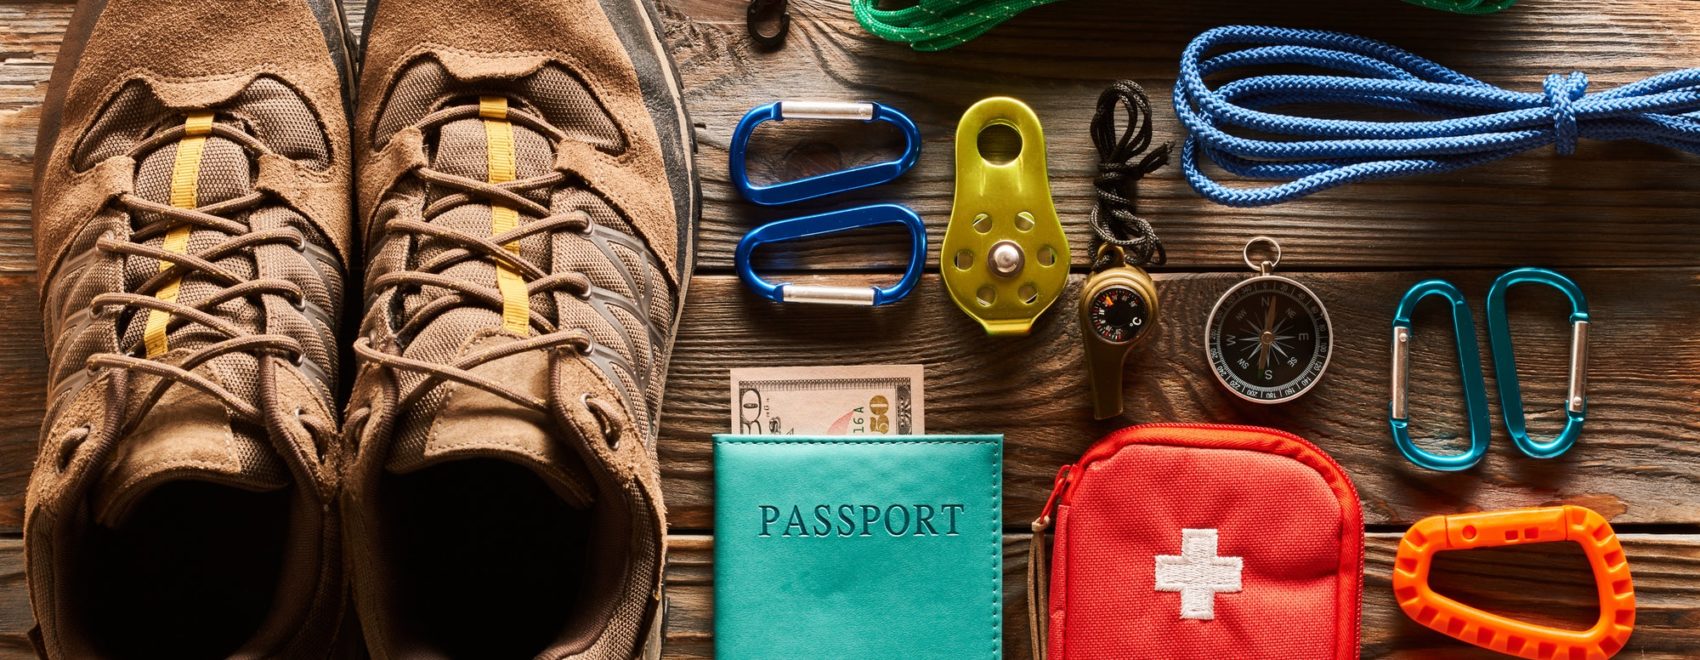 Travel items for hiking flat lay